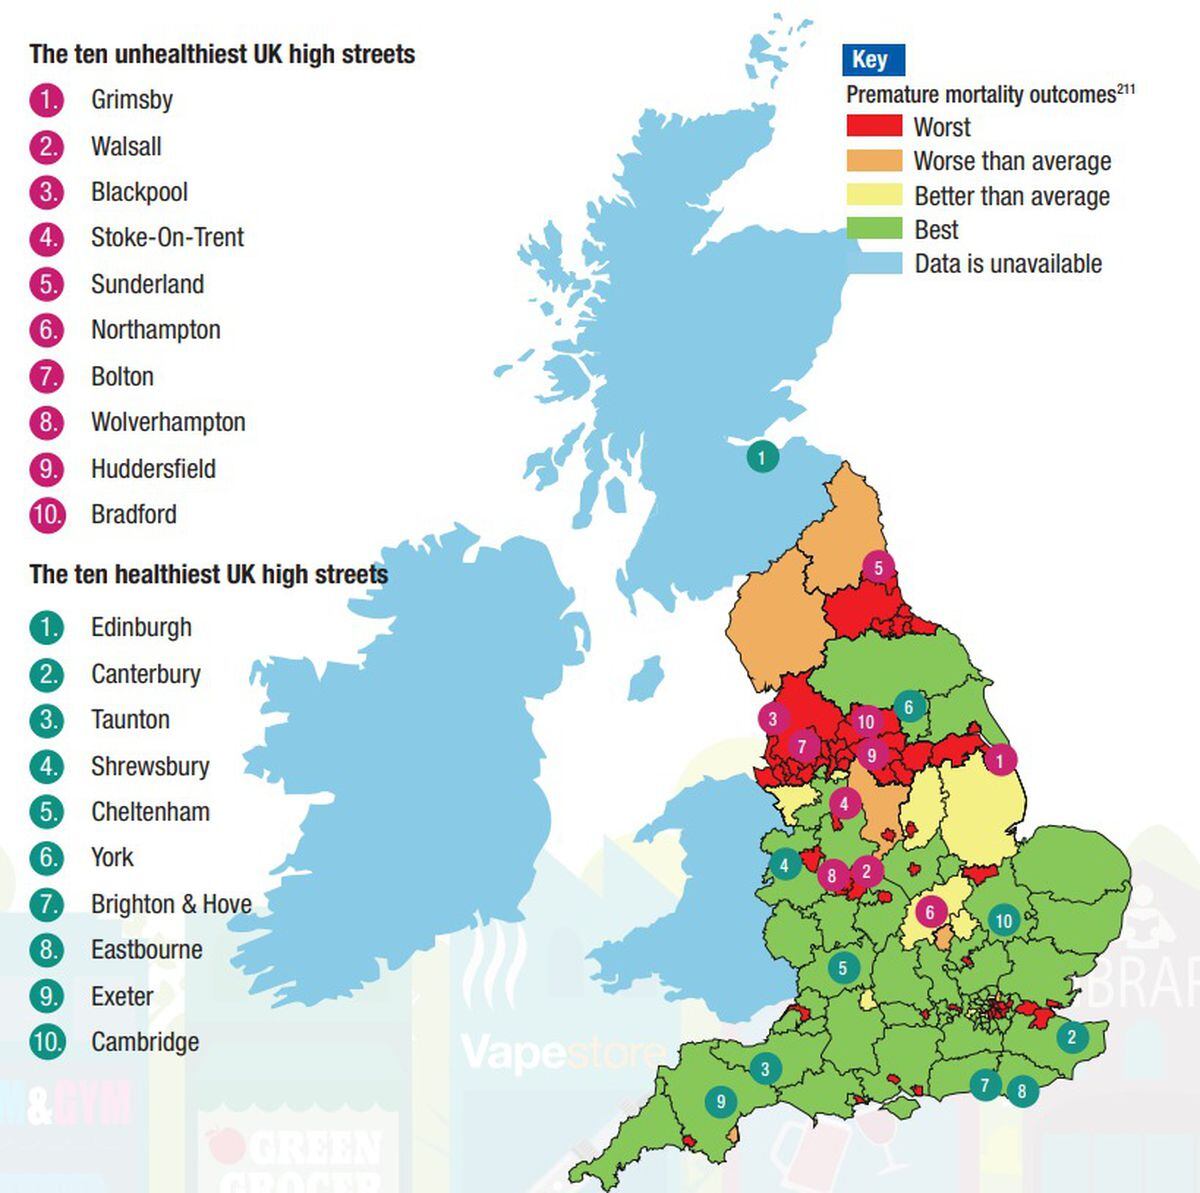 A map showing the top 10 most and least healthiest UK high streets